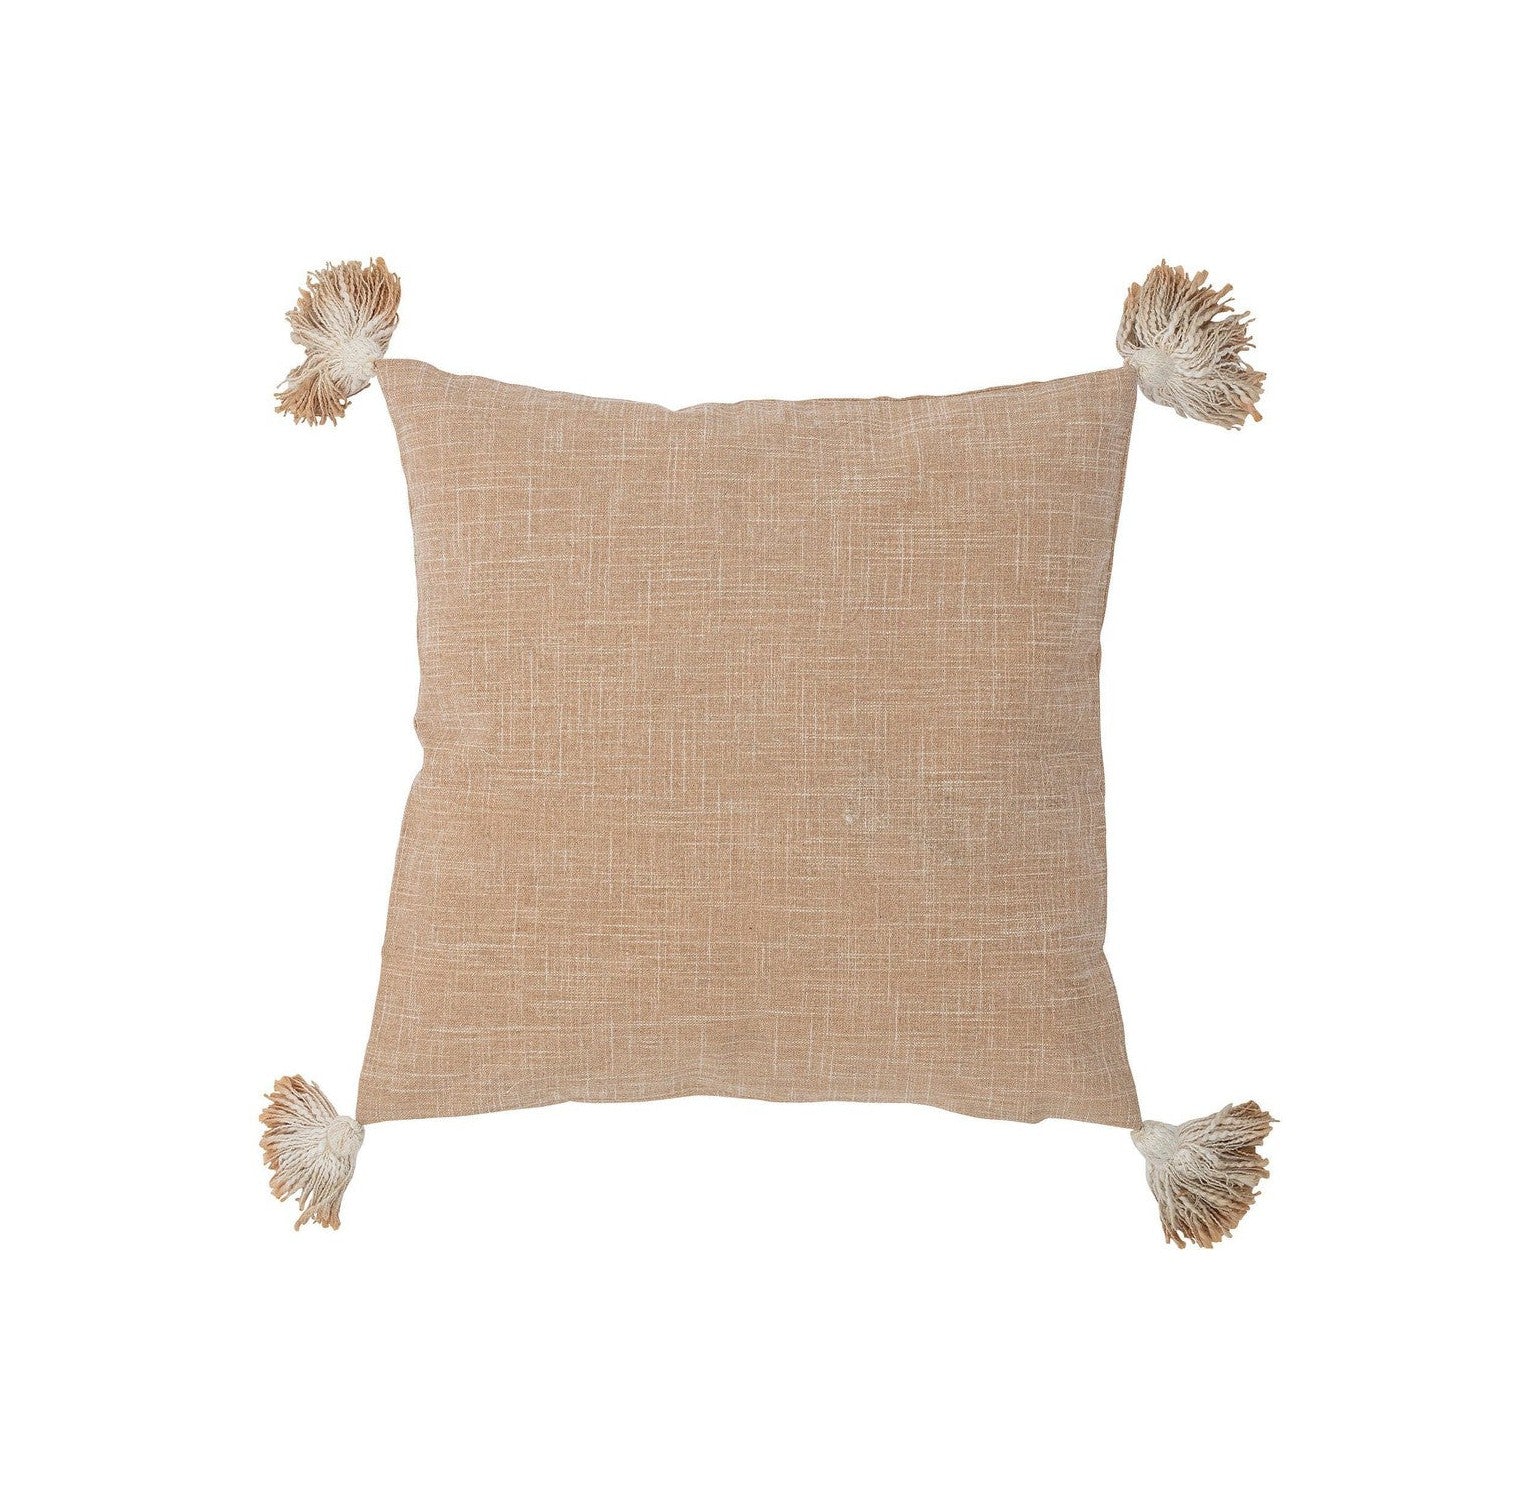 Bloomingville Siff Cushion, Nature, Cotton